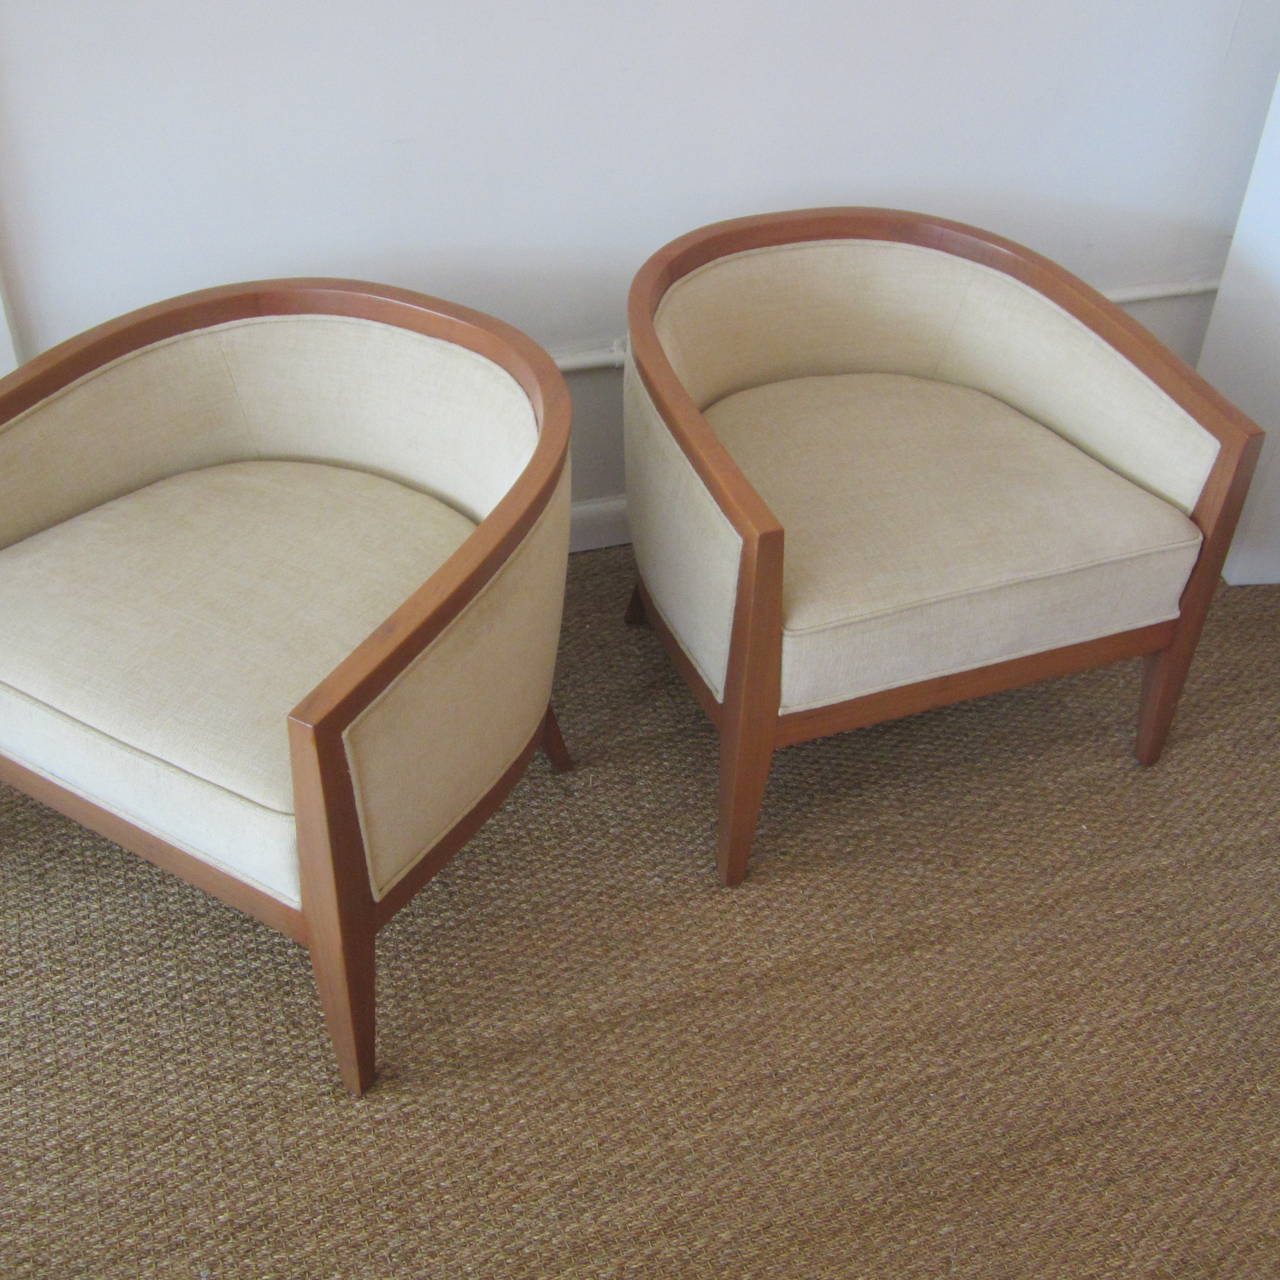 Upholstery Sleek Curved Back Midcentury Armchairs